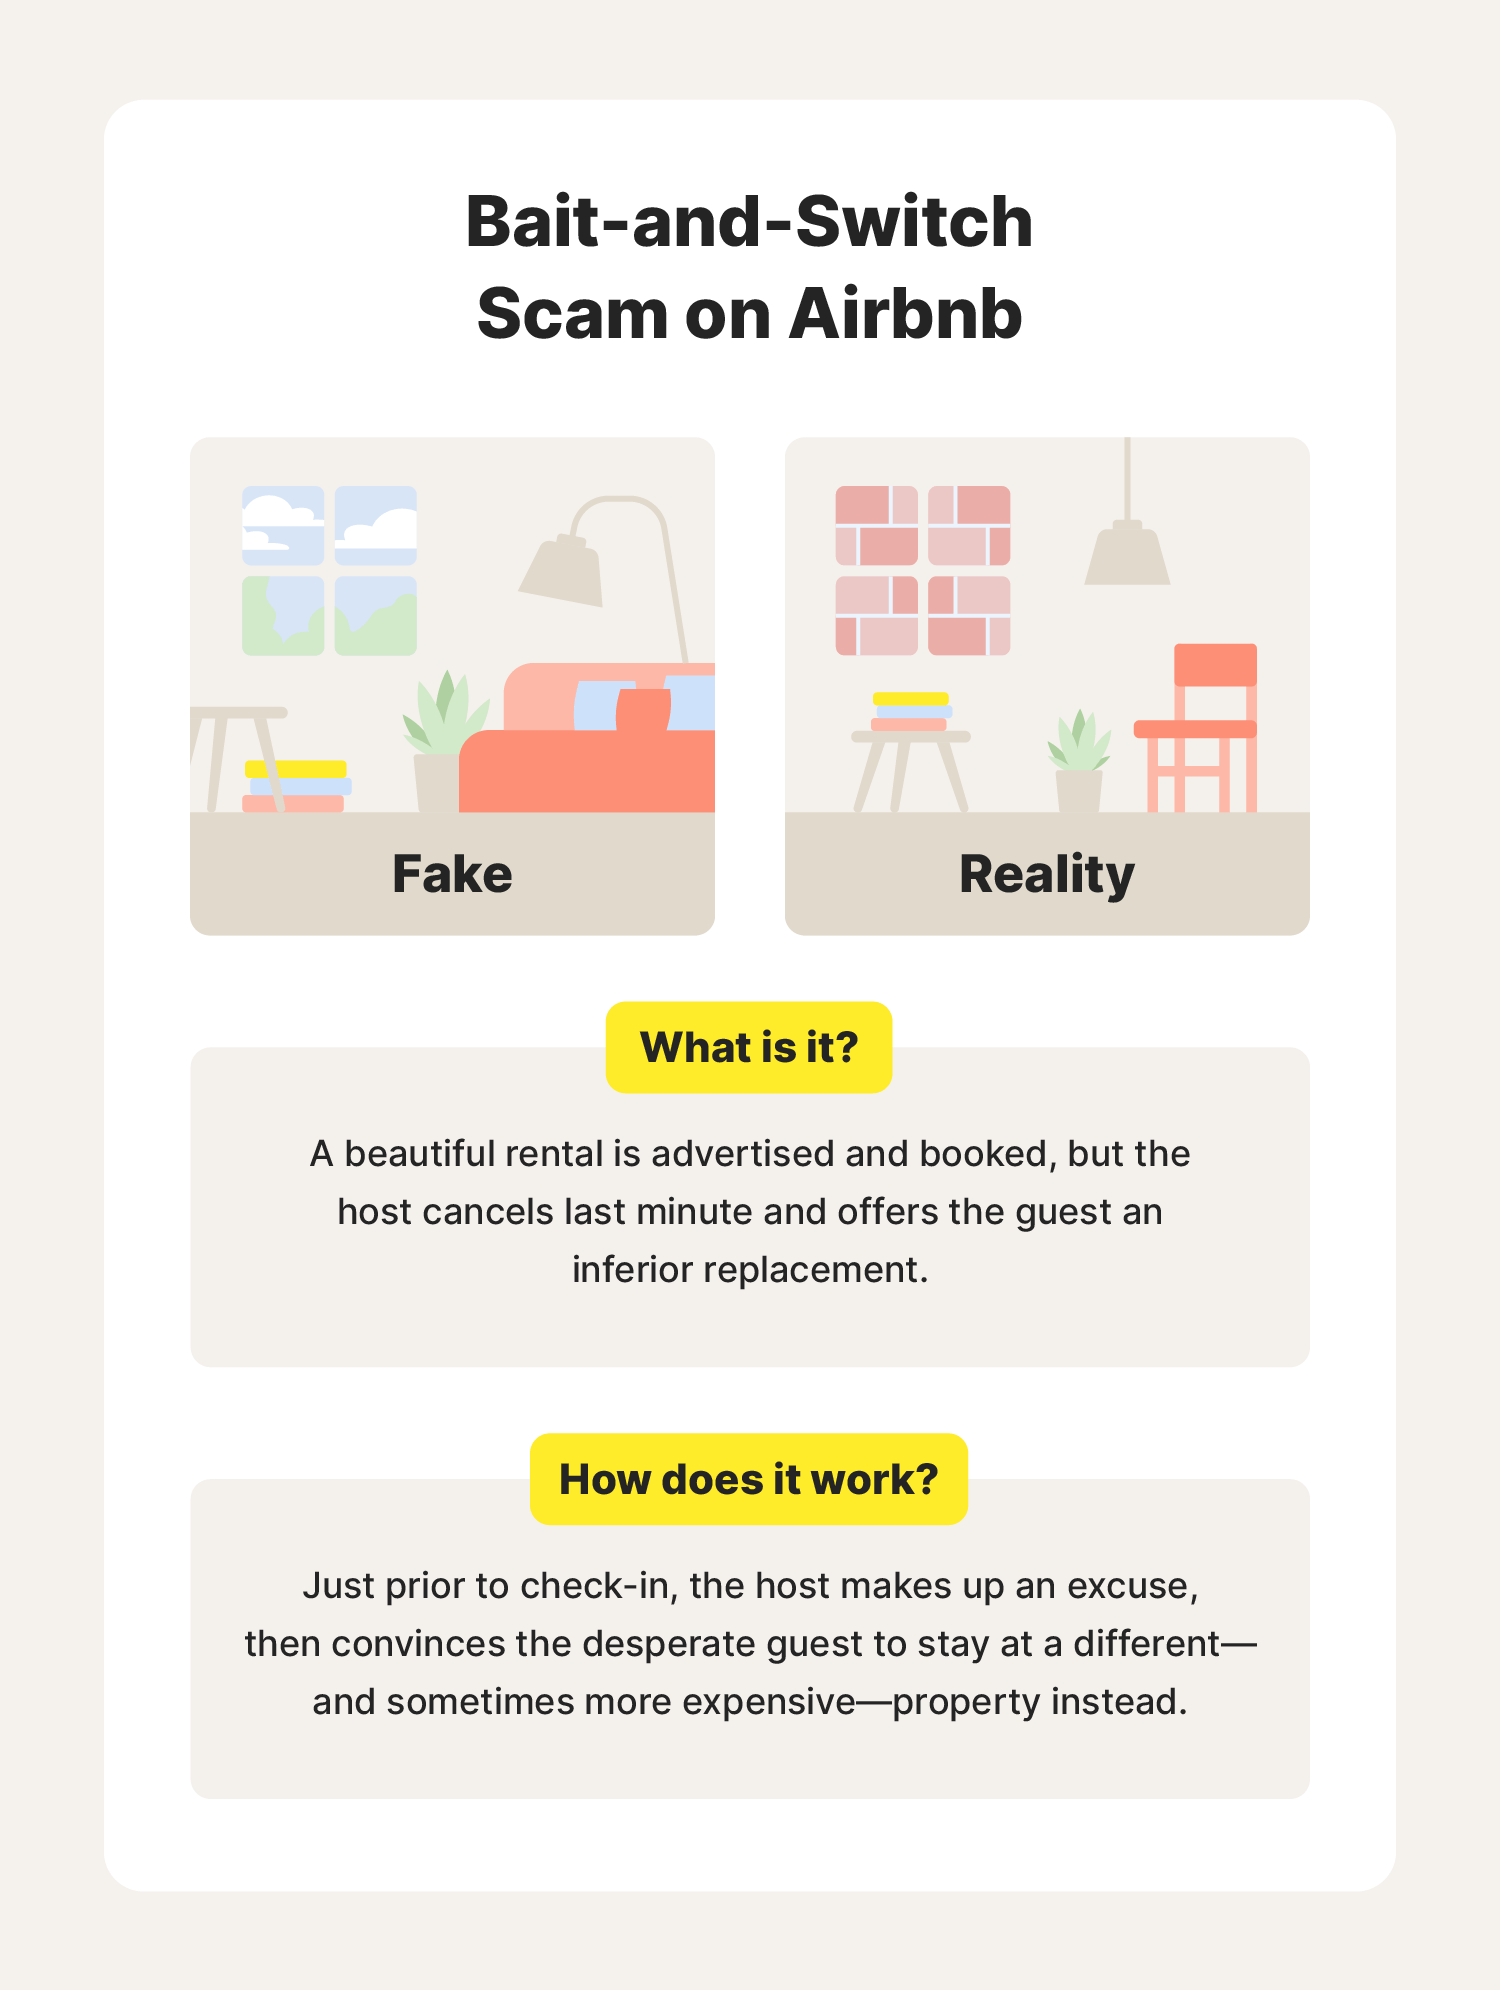 A graphic showcases what a bait-and-switch Airbnb scam is and how it works.